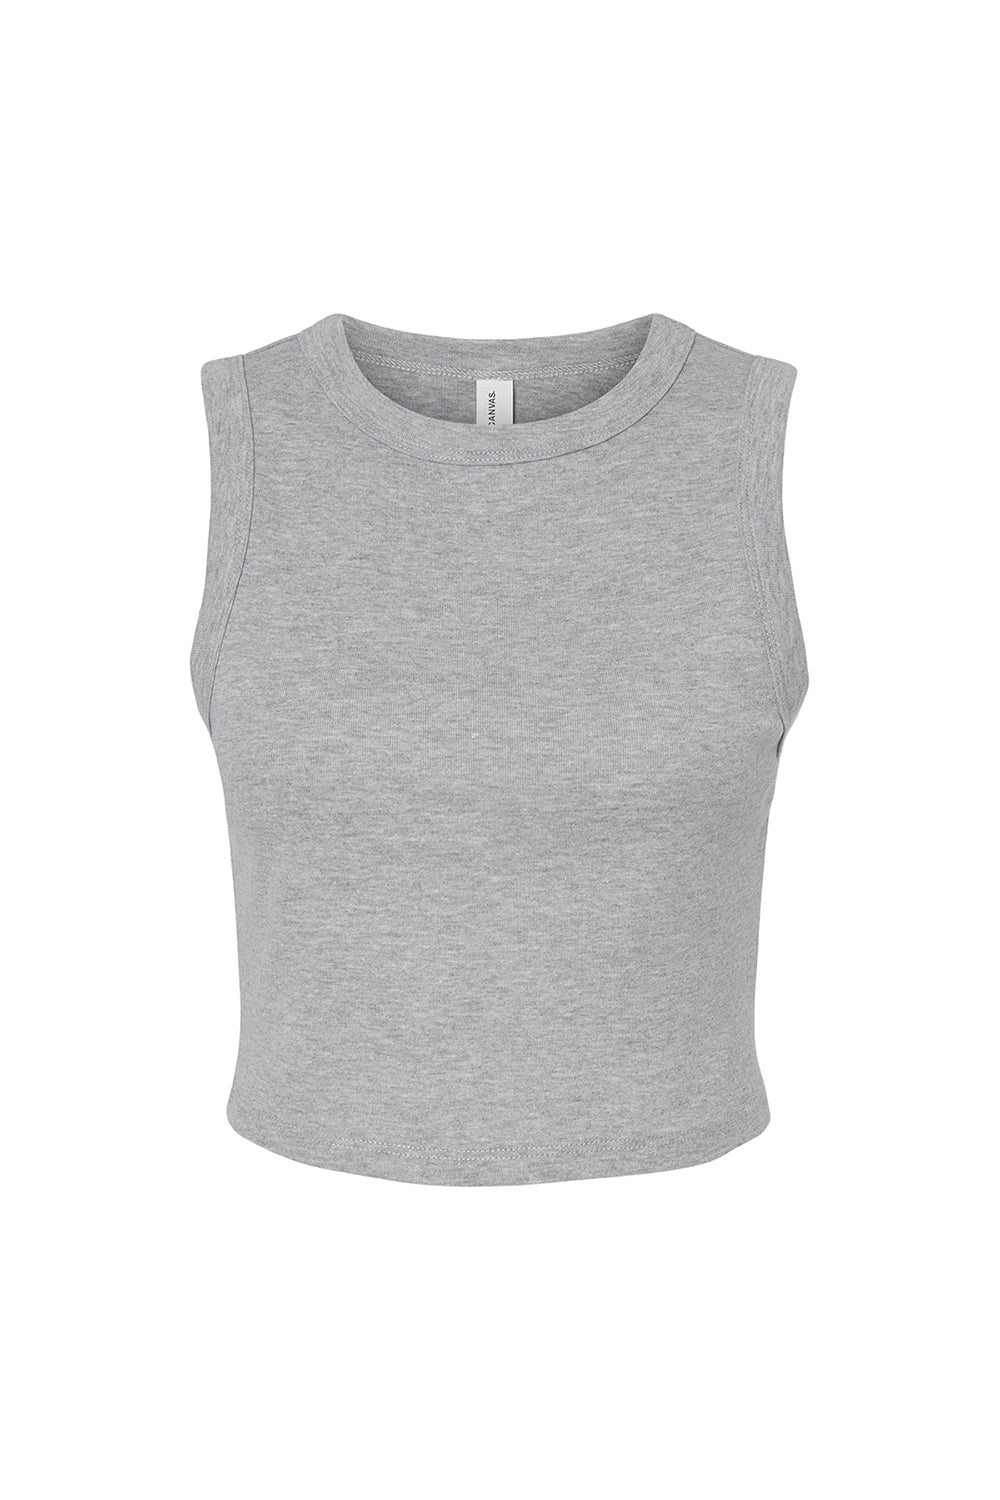 Bella + Canvas 1013BE Womens Micro Ribbed Muscle Crop Tank Top Heather Grey Flat Front